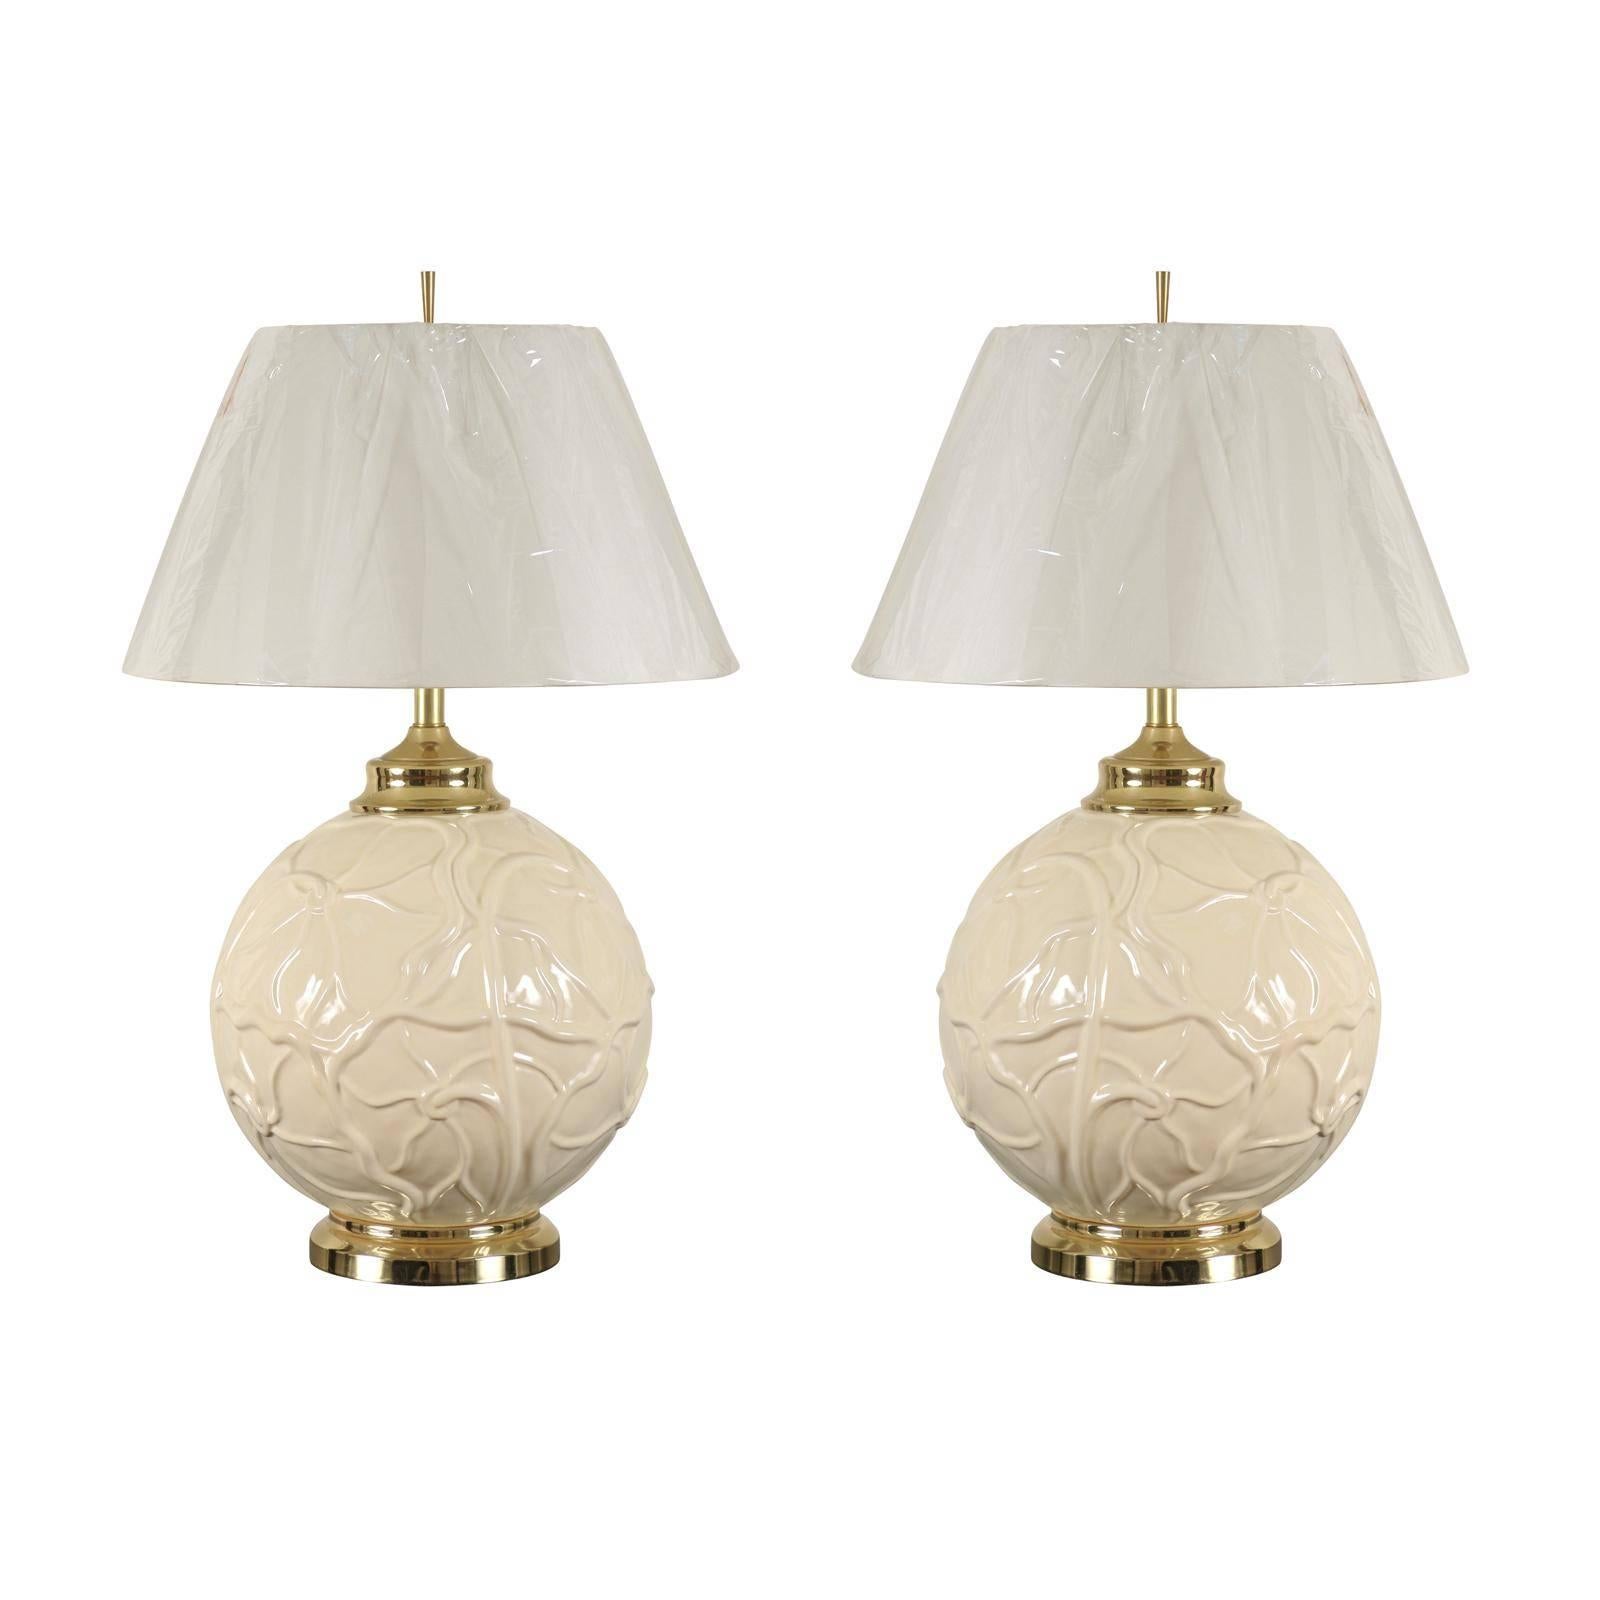 Outstanding Pair of Vintage Ceramic Lily Pad Lamps